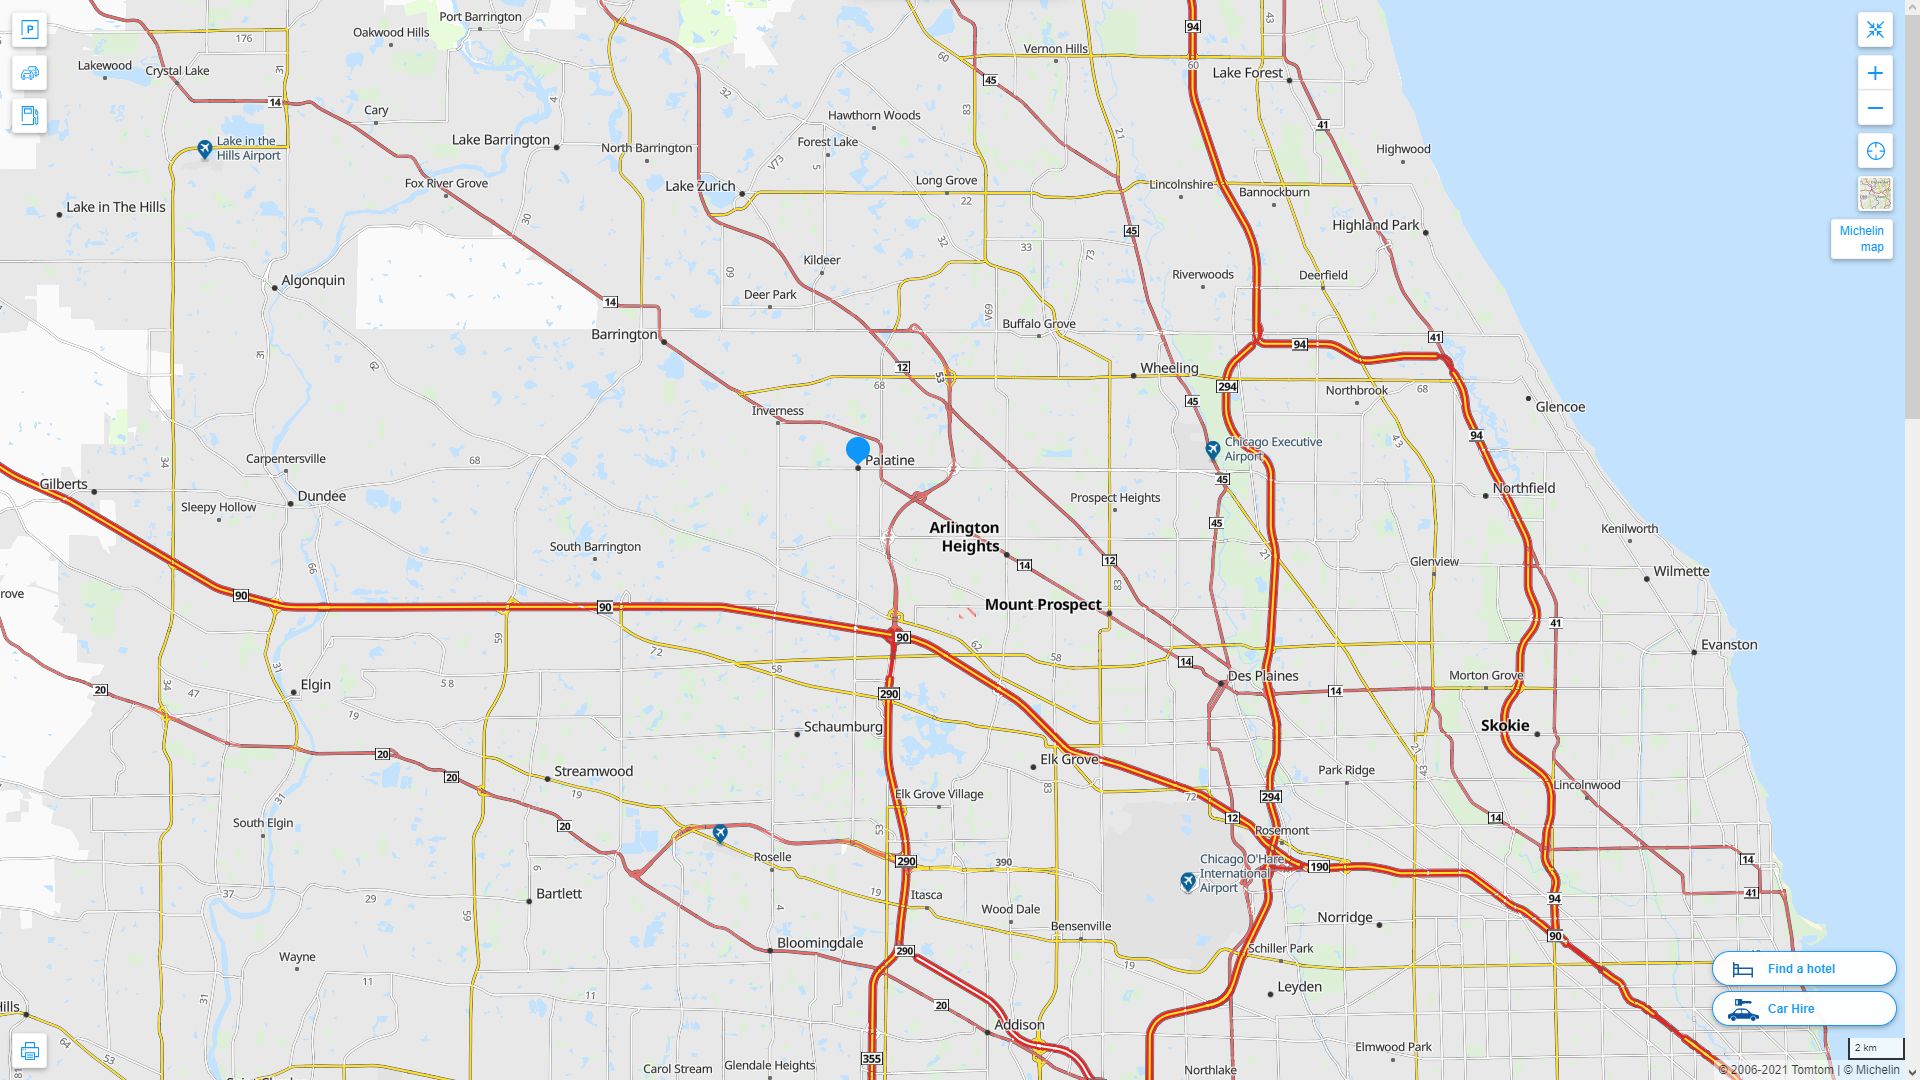 Palatine illinois Highway and Road Map